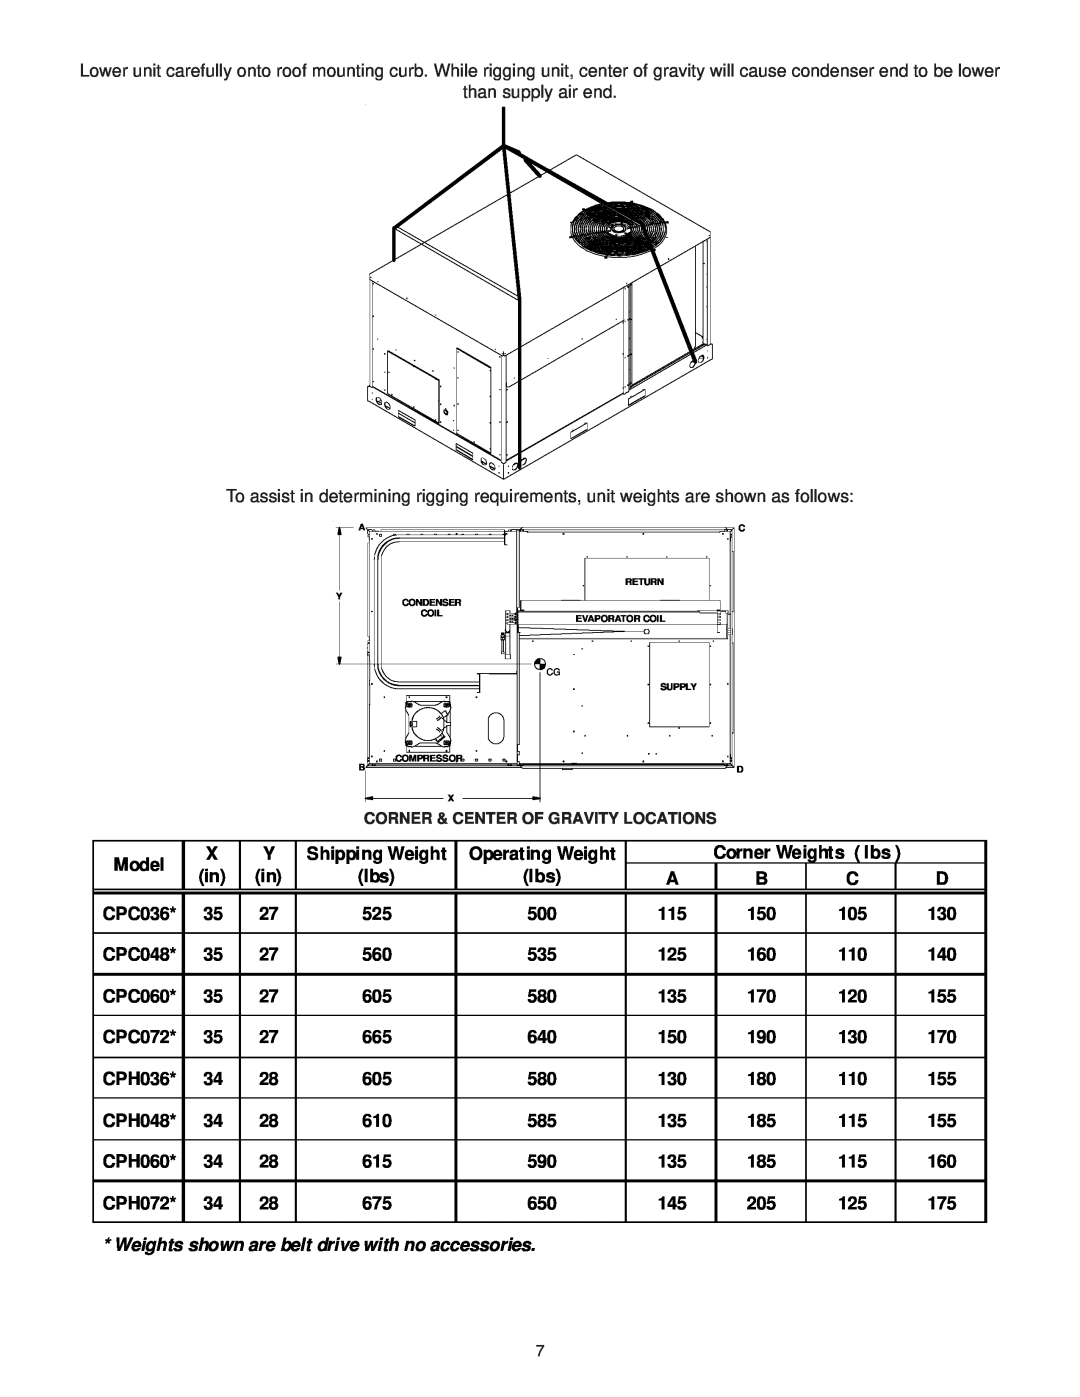 Goodman Mfg IO-354B installation instructions Model, Weights shown are belt drive with no accessories 